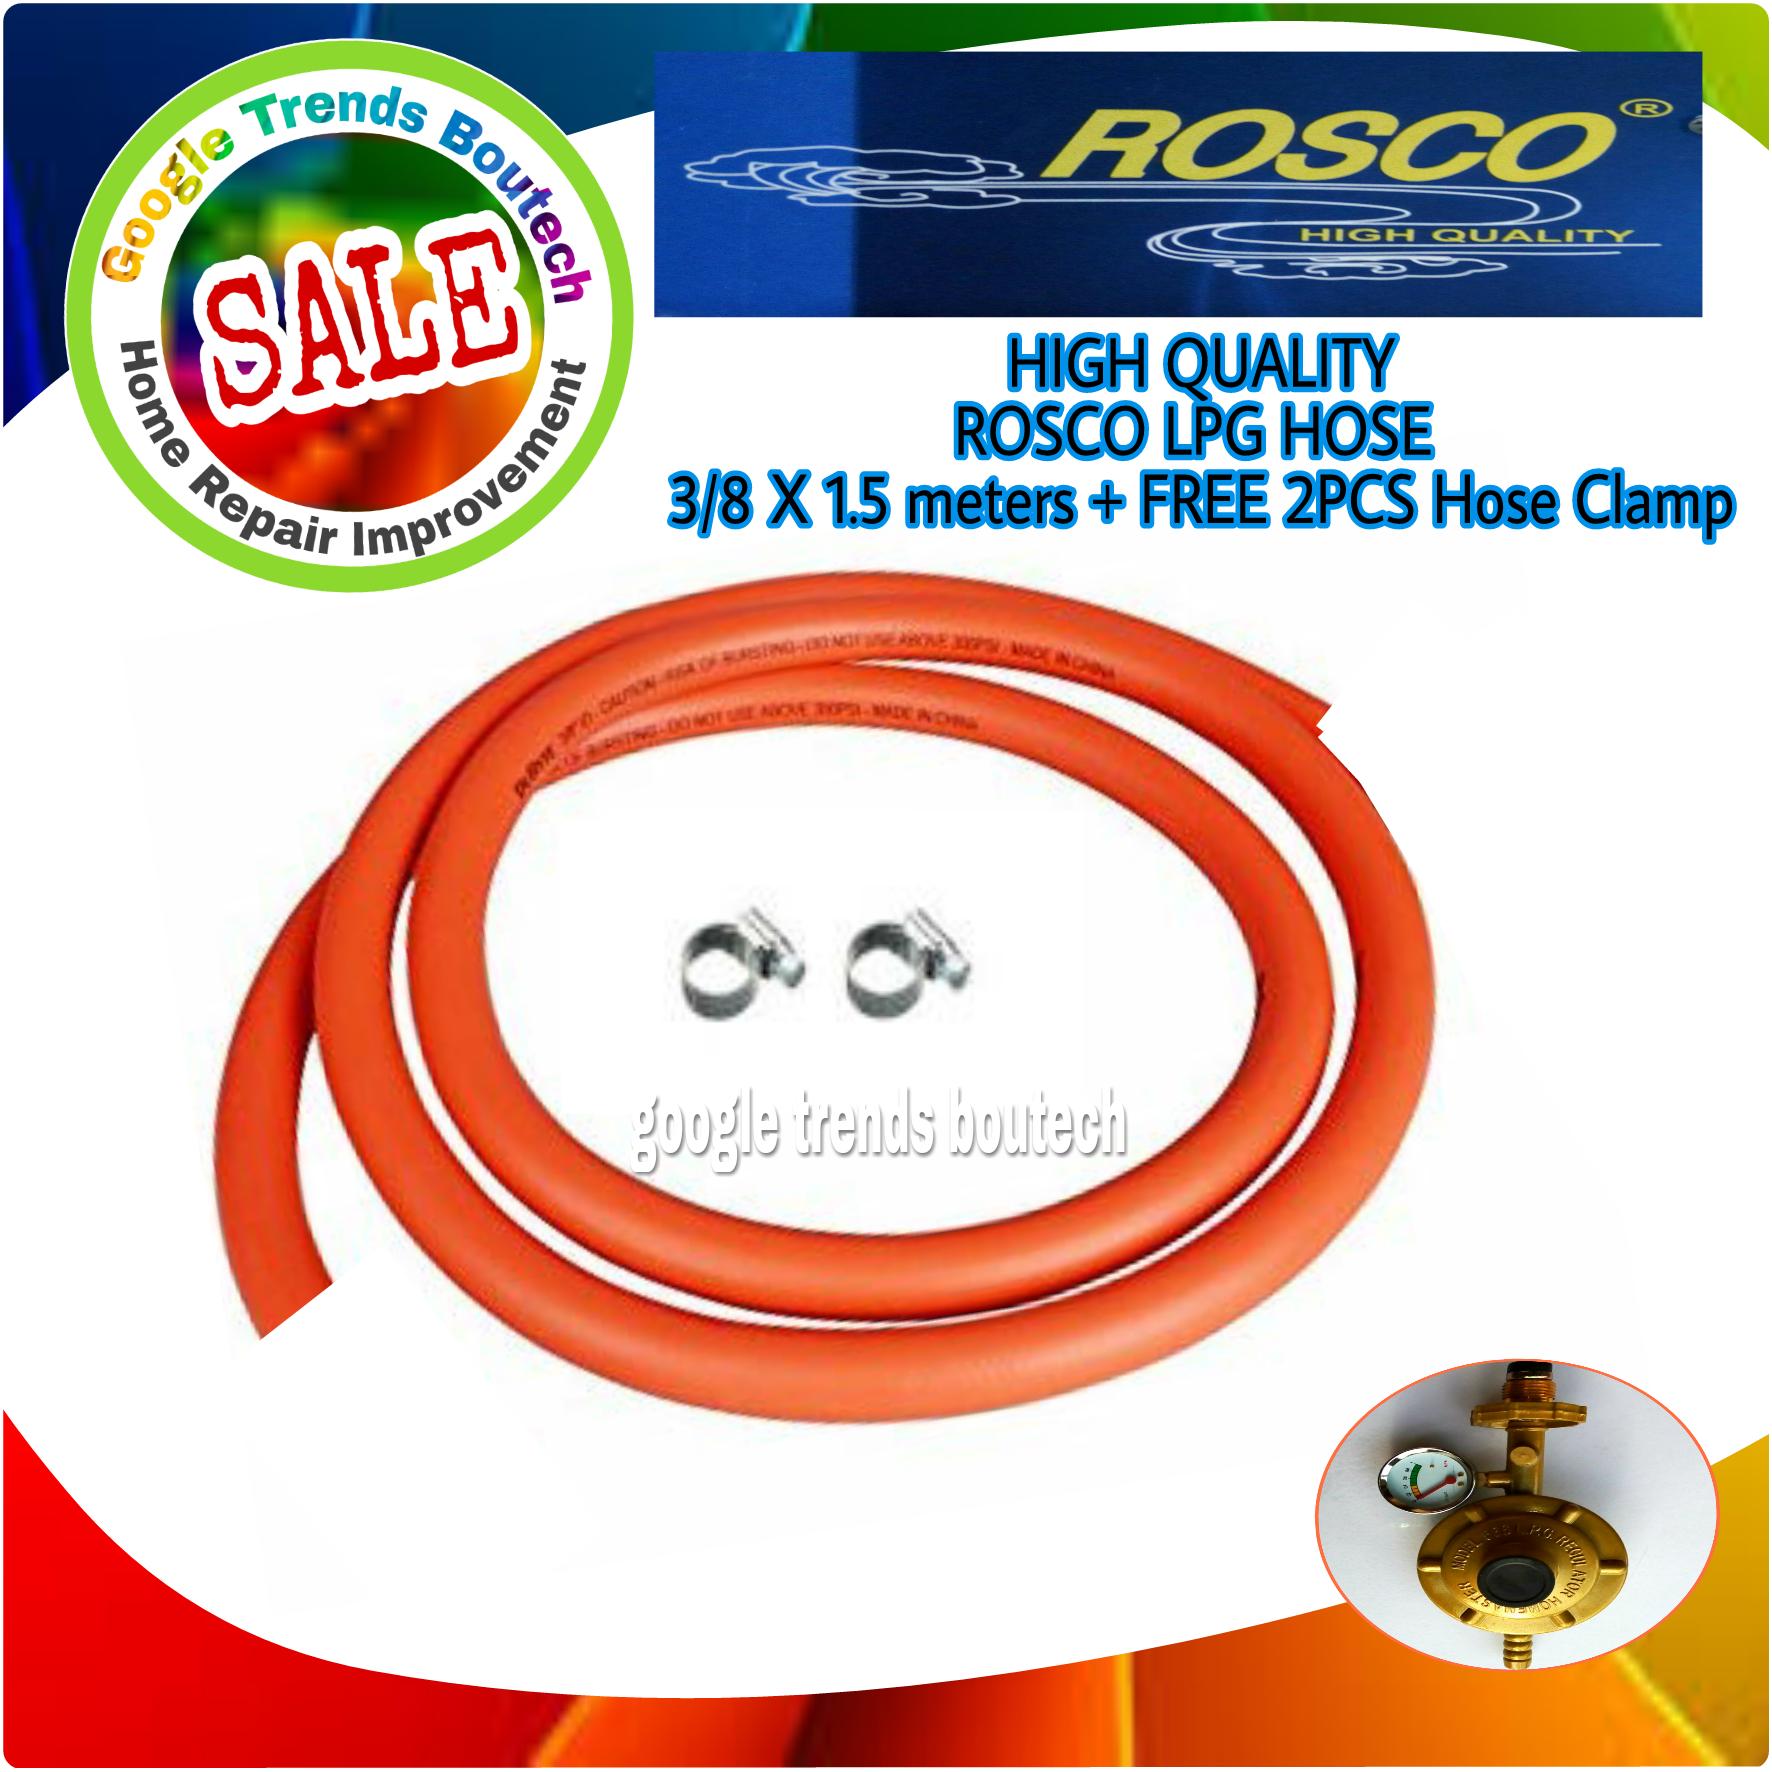 Rosco LPG Hose Regulator High Quality with Free 2pcs. Hose Clamp  (It Can be Used On Any Kind of Regulator)